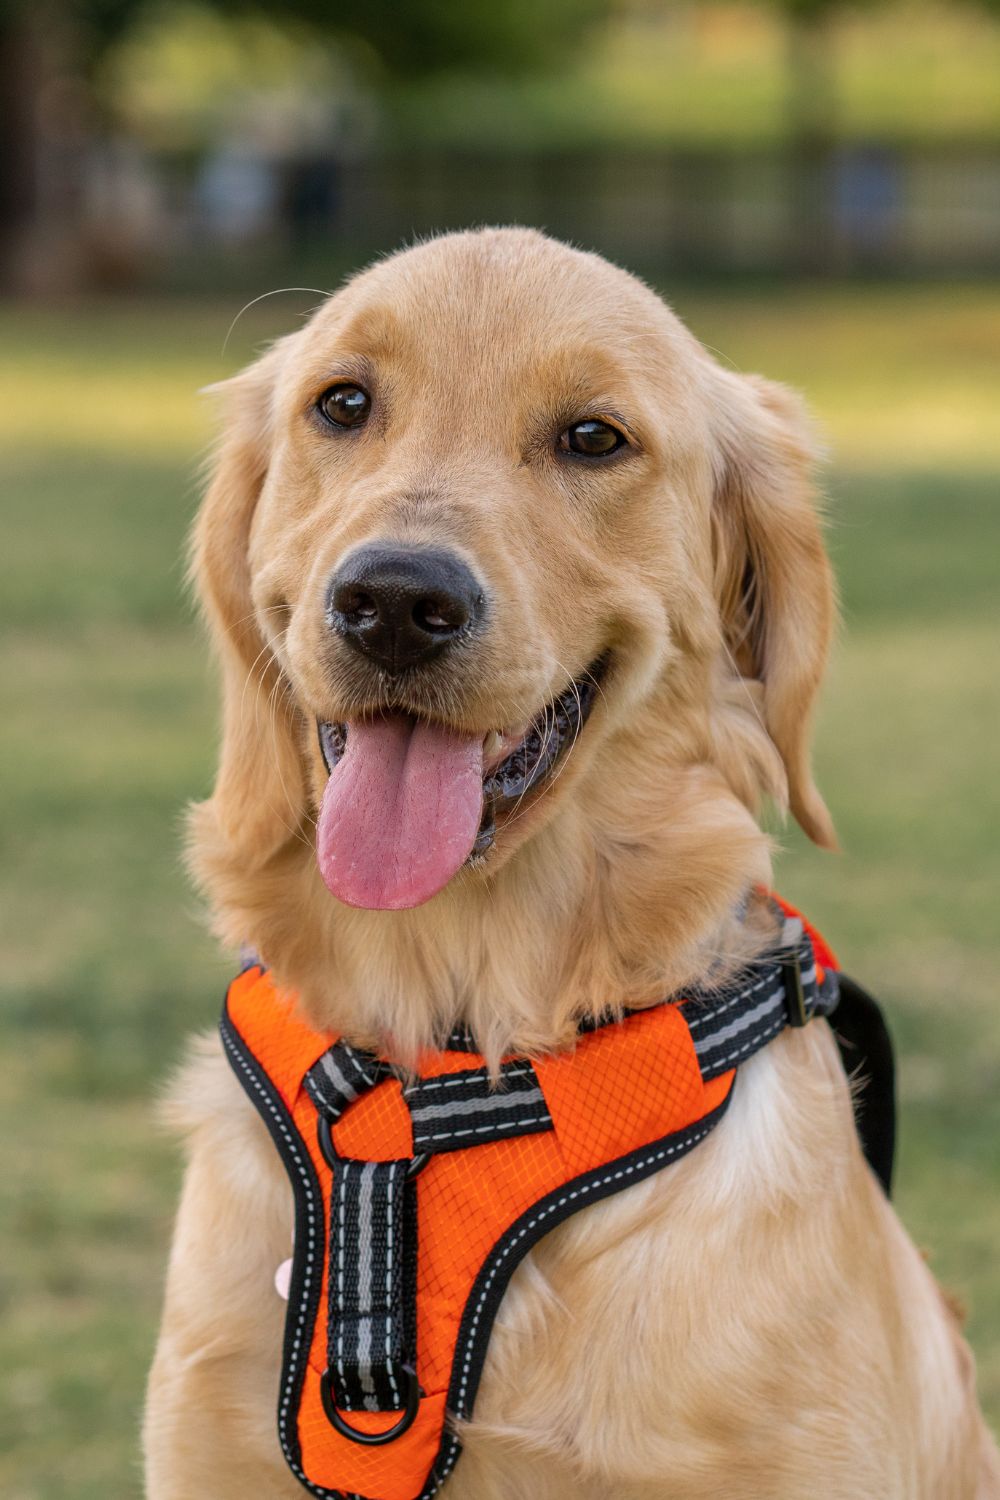 Dog Harness Safety Tips Every Owner Should Know